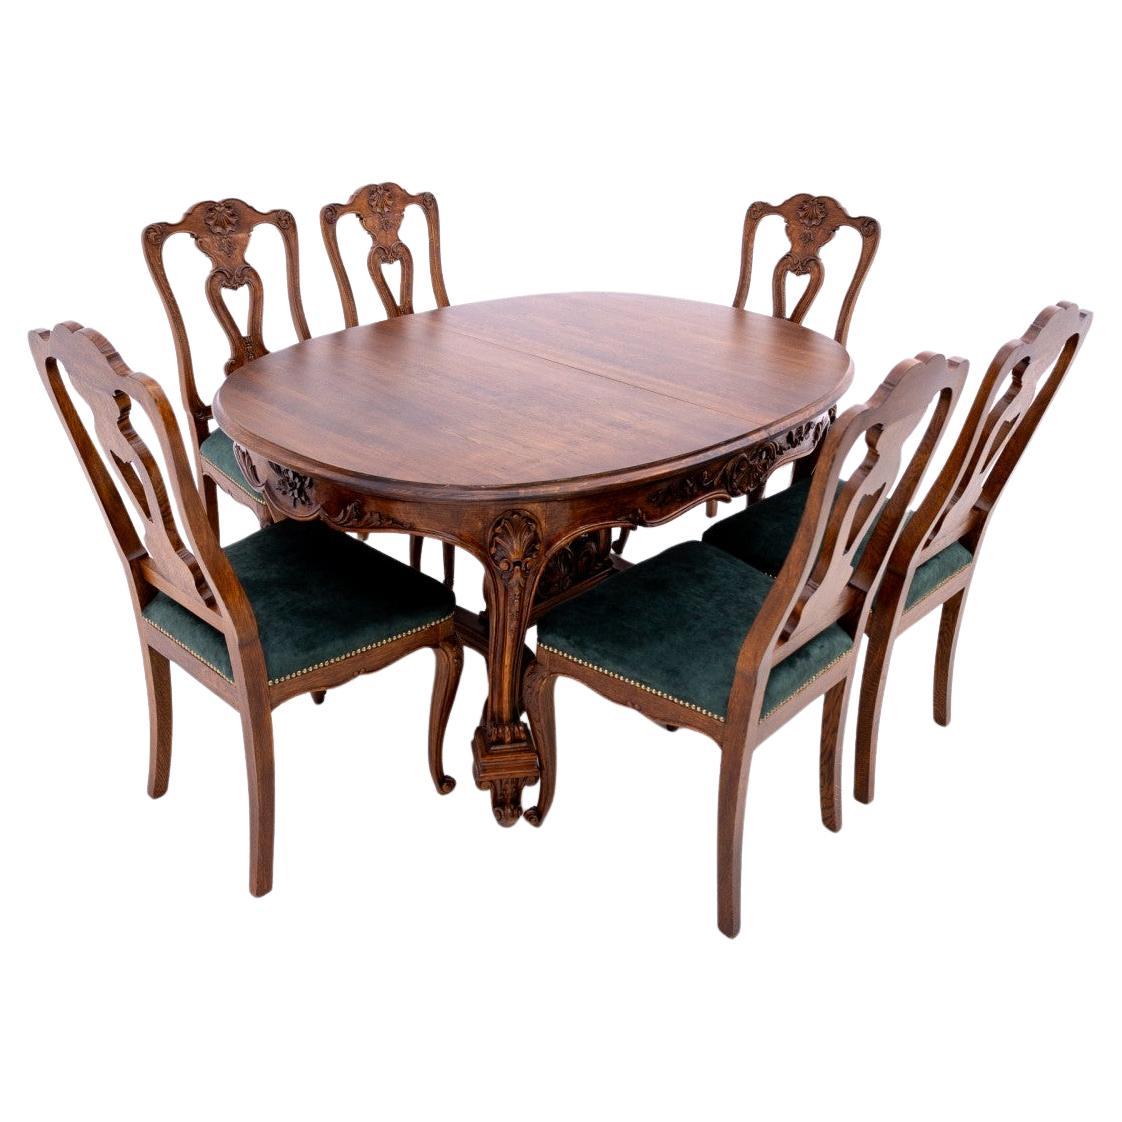 Antique table with 6 chairs, Western Europe, late 19th century. For Sale